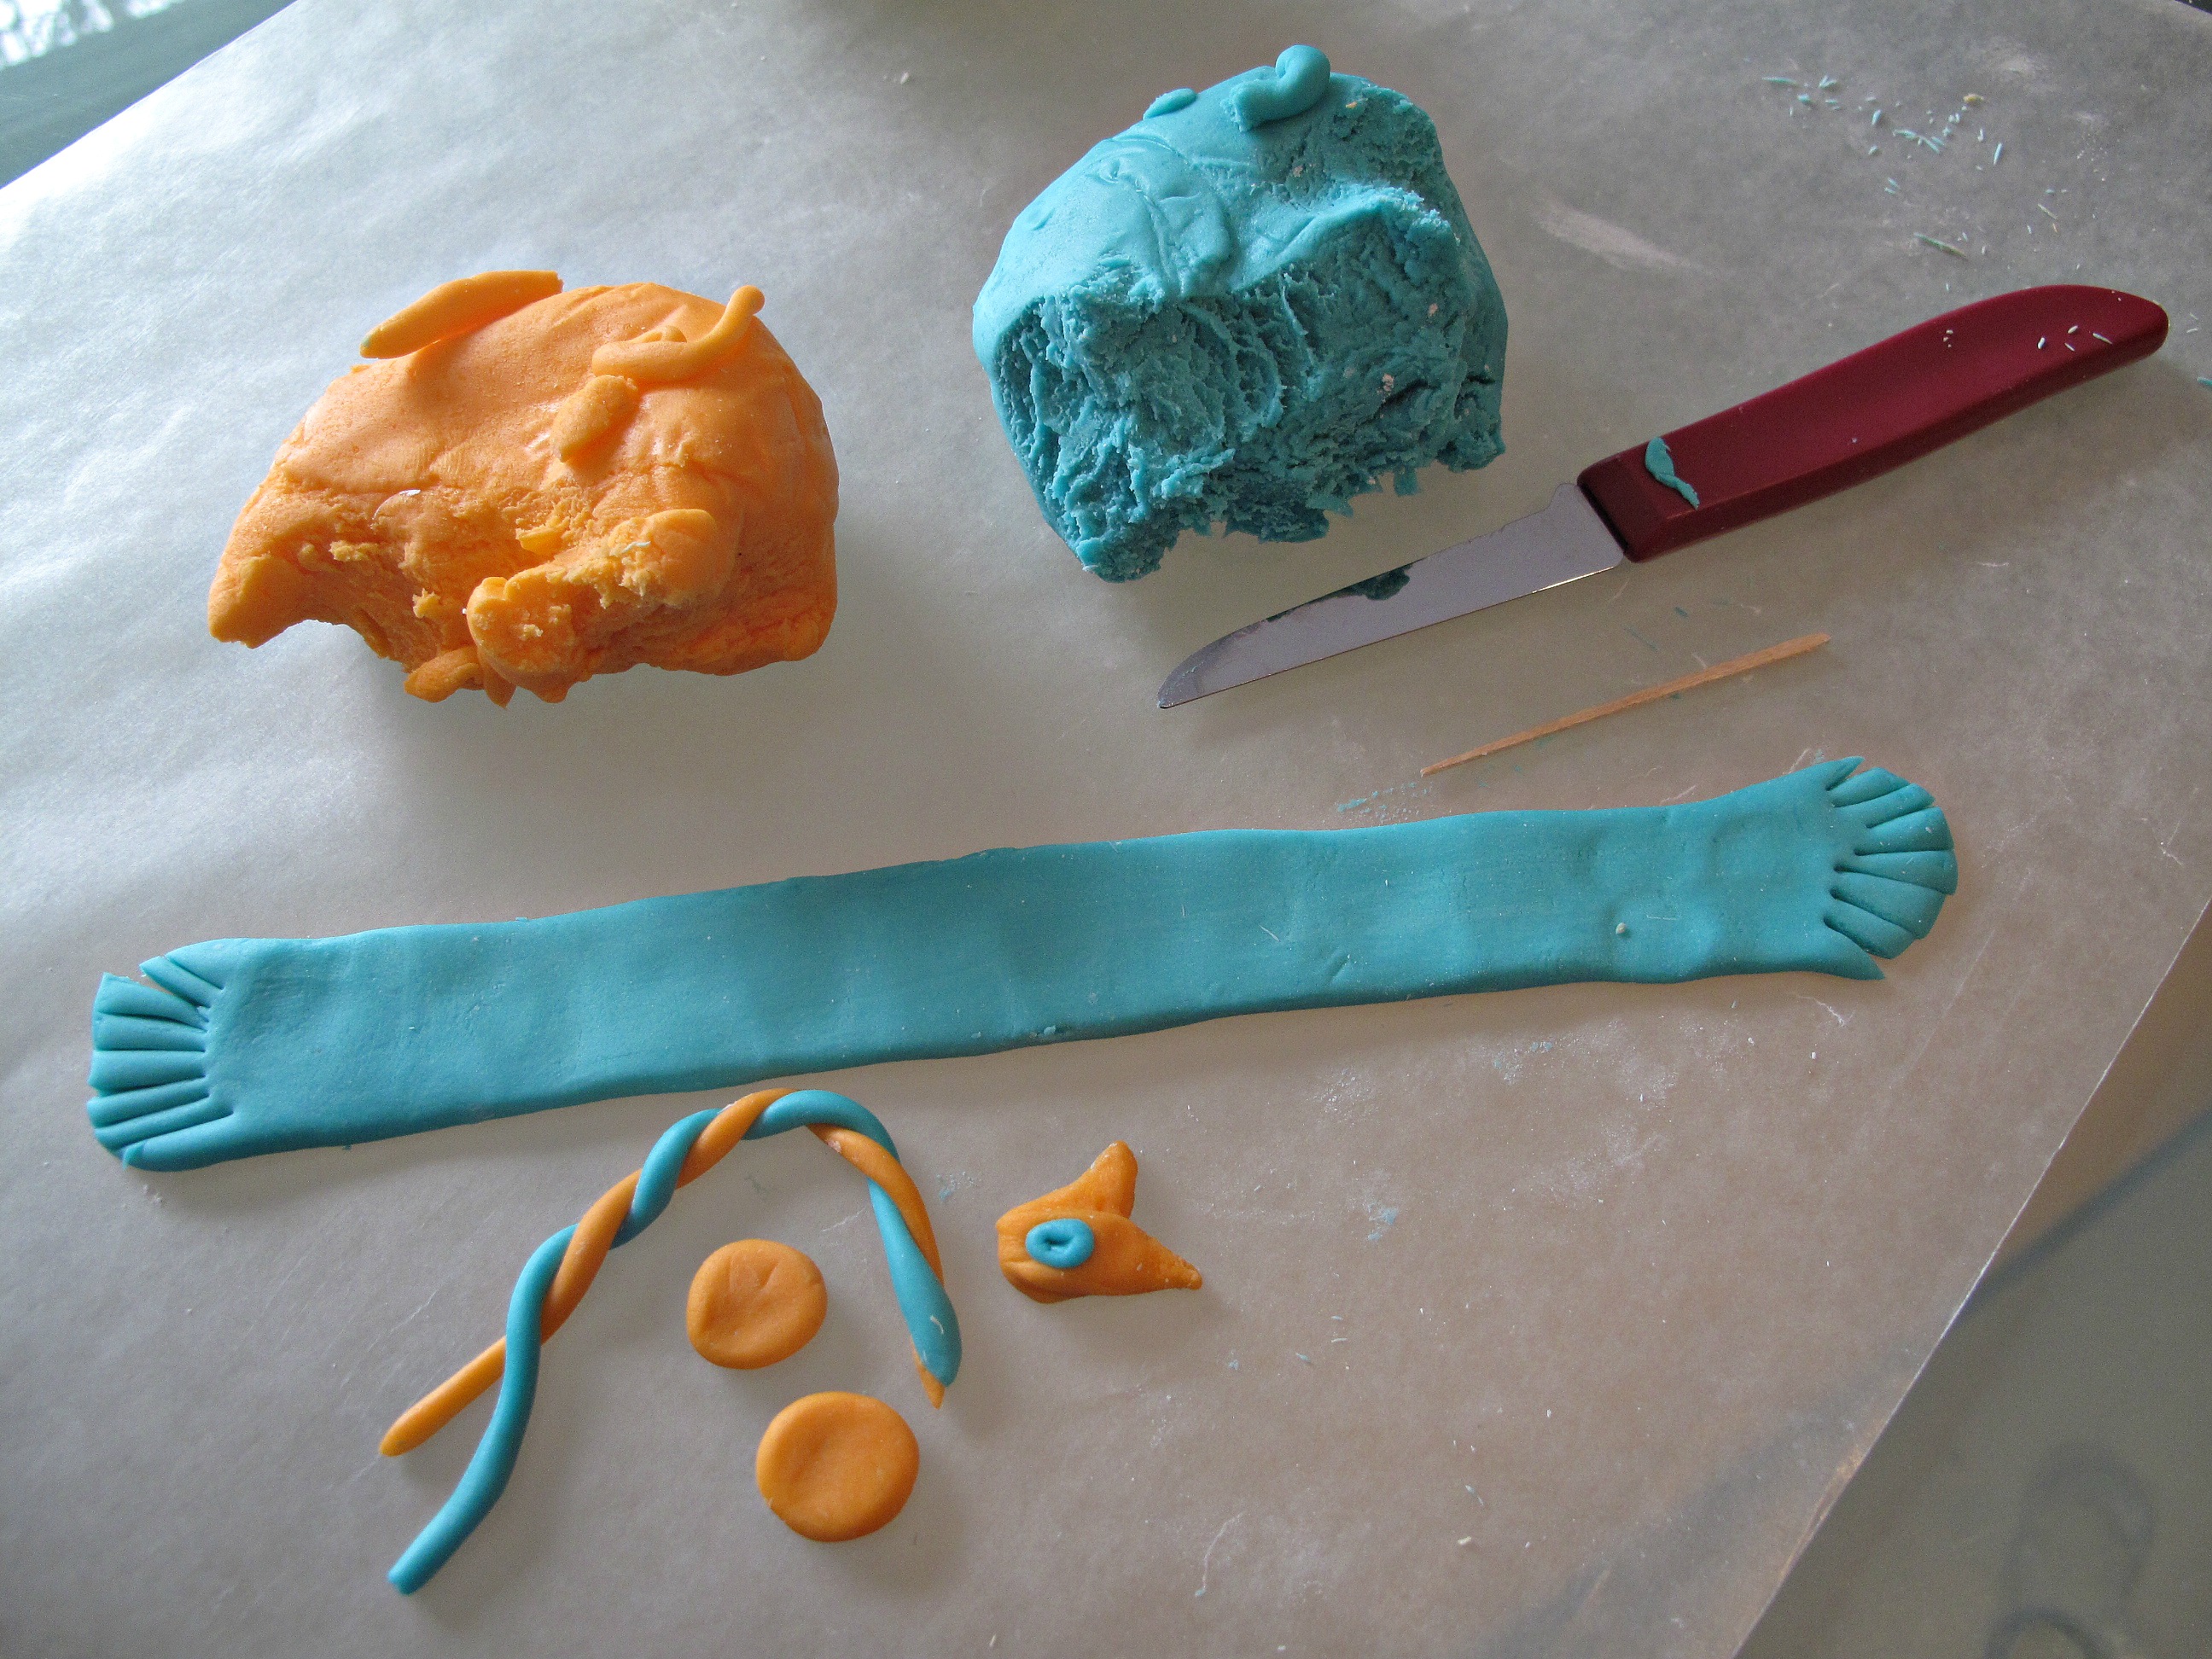 Colored fondant formed into a fringed scarf and pieces for earmuffs.